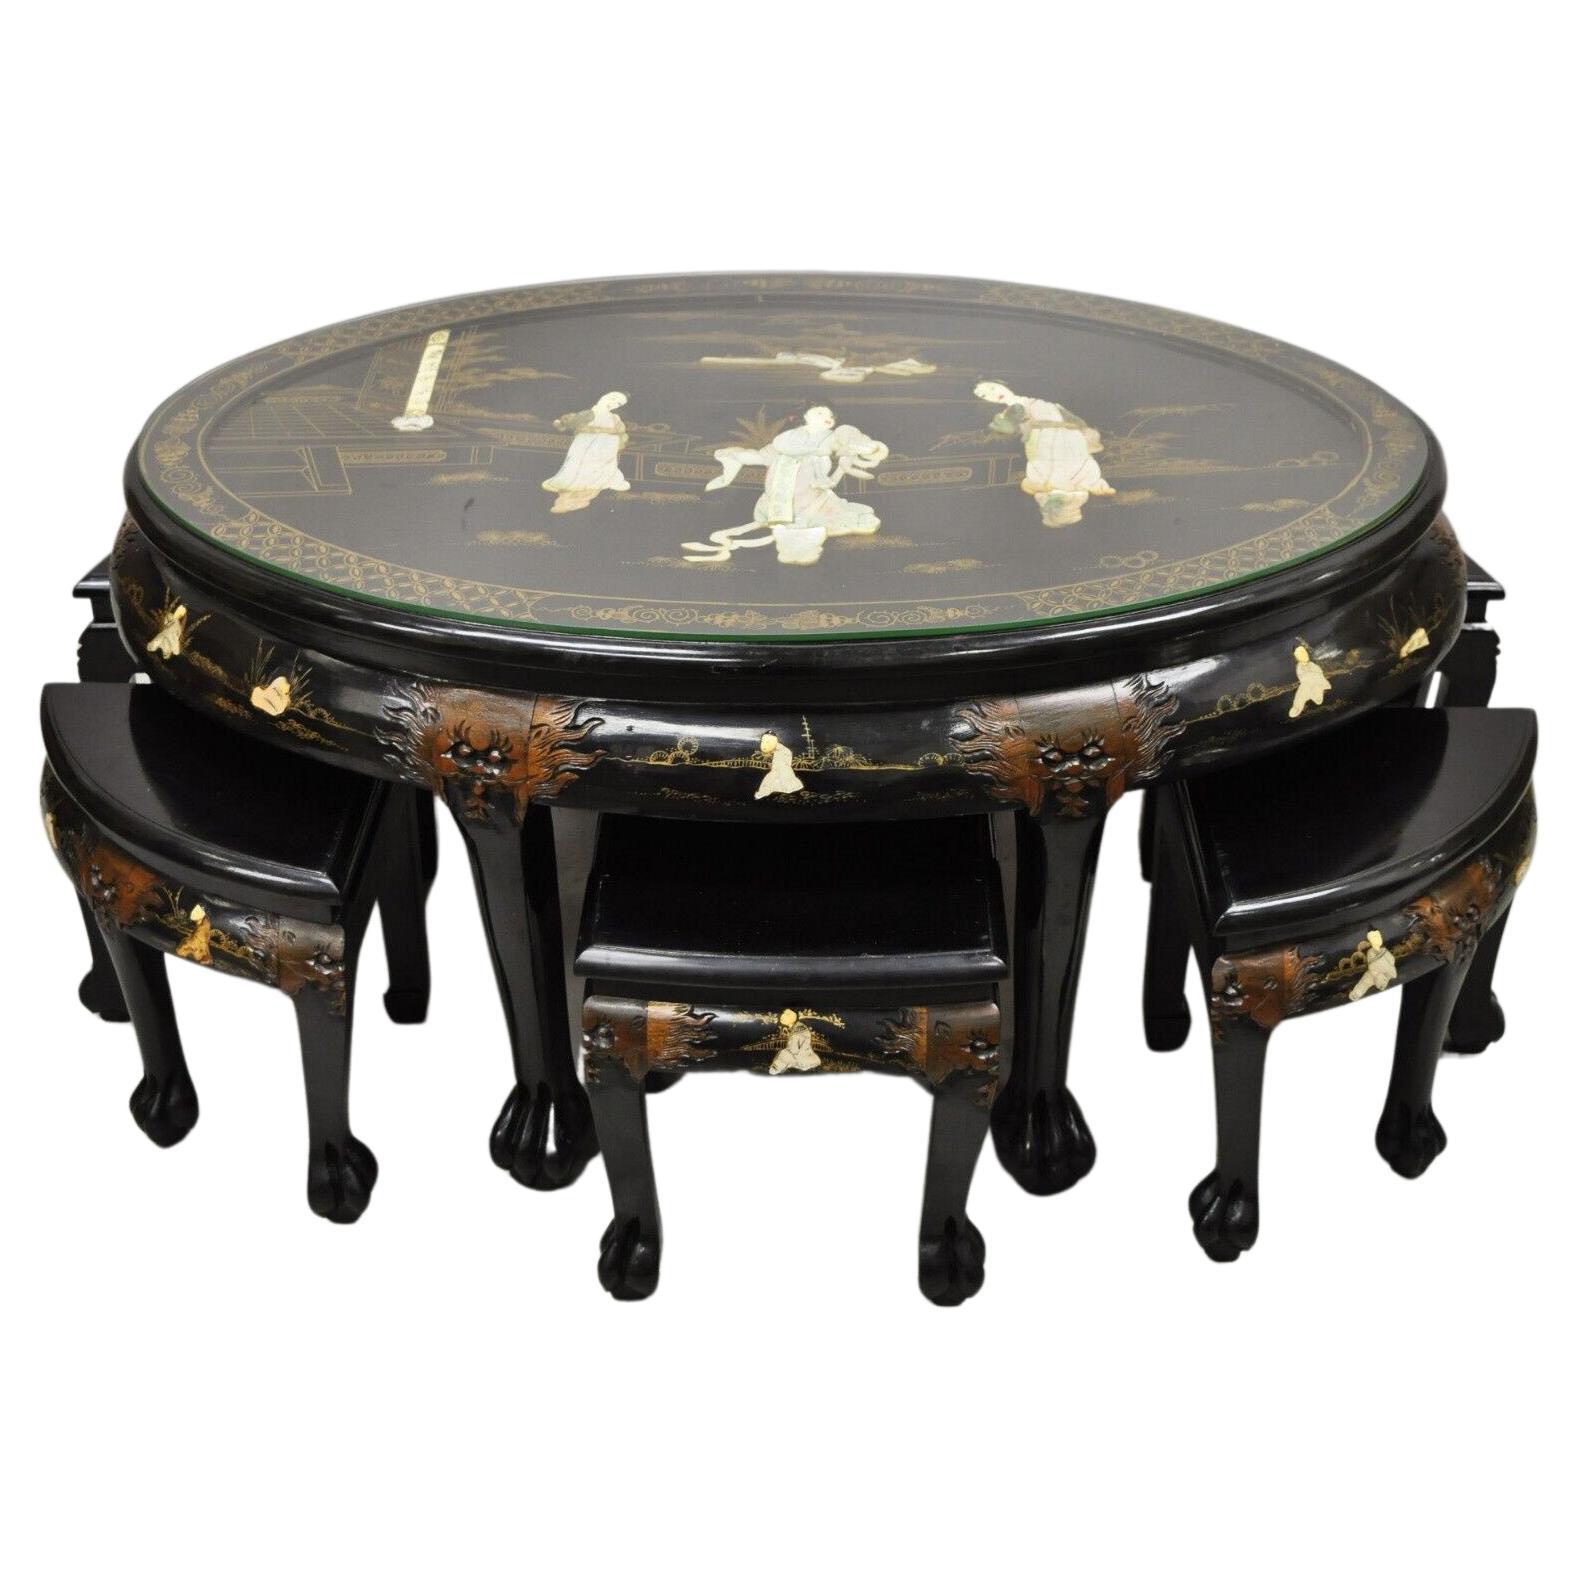 Chinese Black Lacquer Mother of Pearl Oval Nesting Coffee Table Set 6 Stools - A